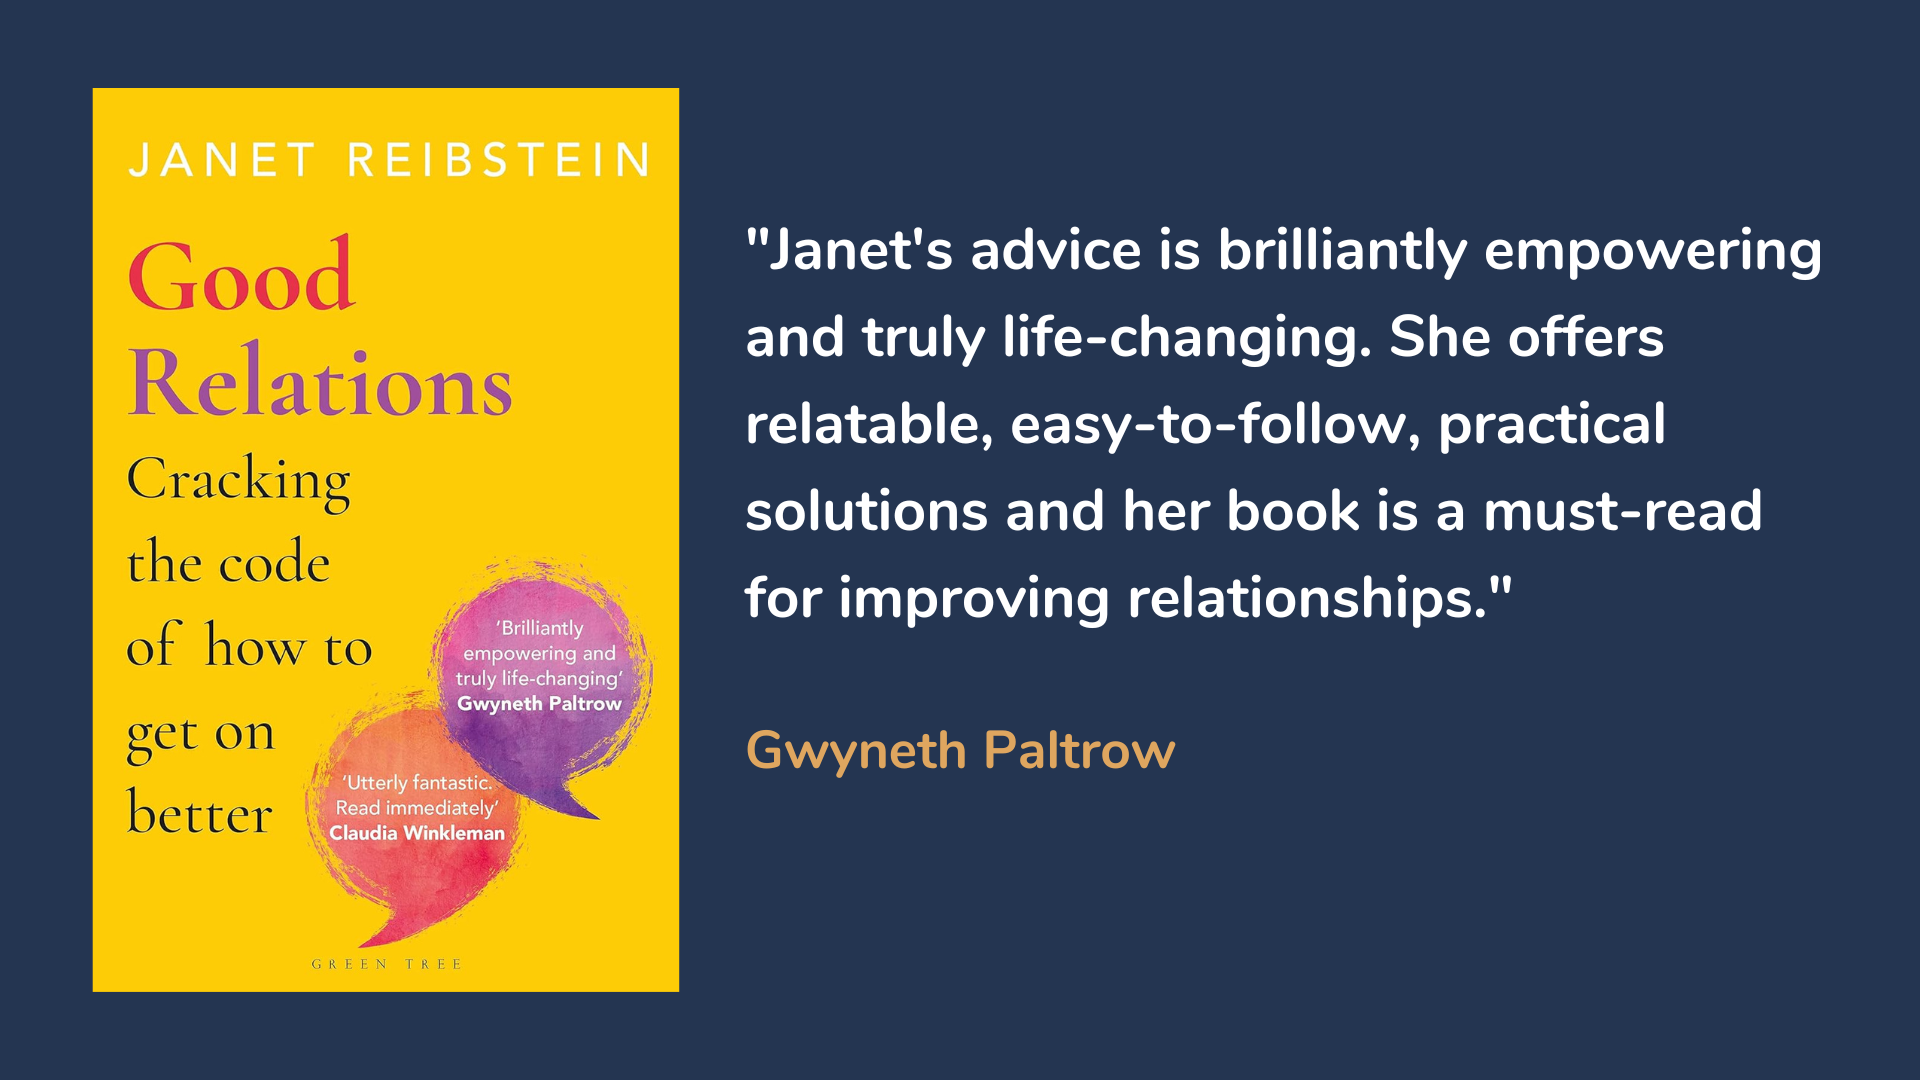 Good Relations: Cracking the Code for How to Get on Better. Book cover and quote about the book by Gwyneth Paltrow.